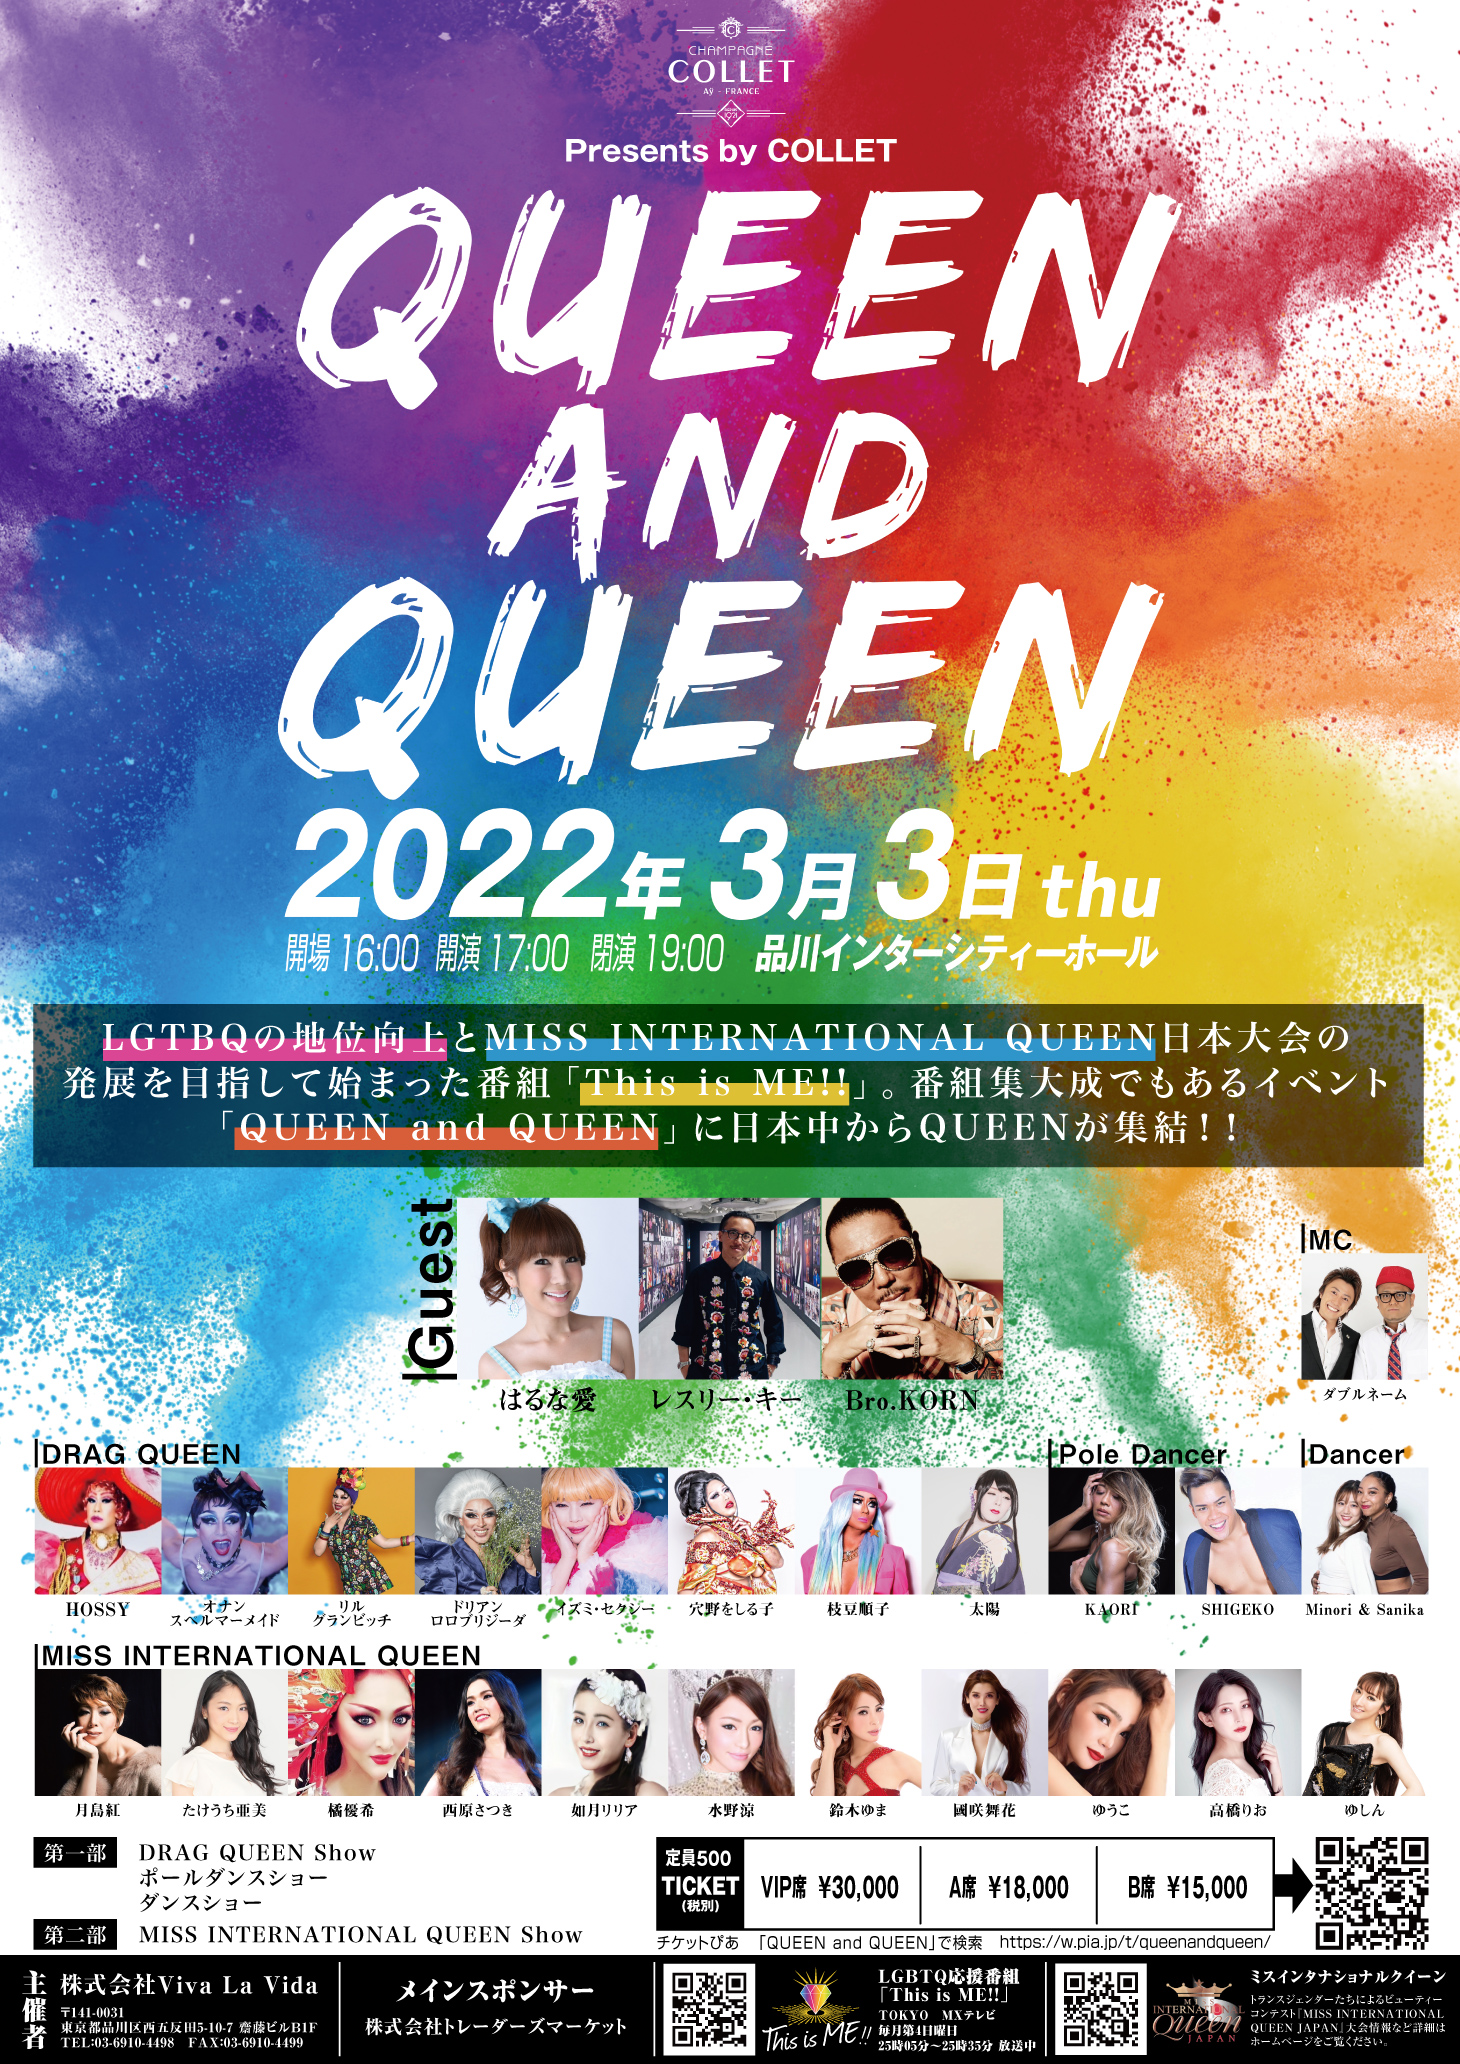 This is ME!!×MISS INTERNATIONAL QUEEN公式イベント『QUEEN and QUEEN』開催決定！